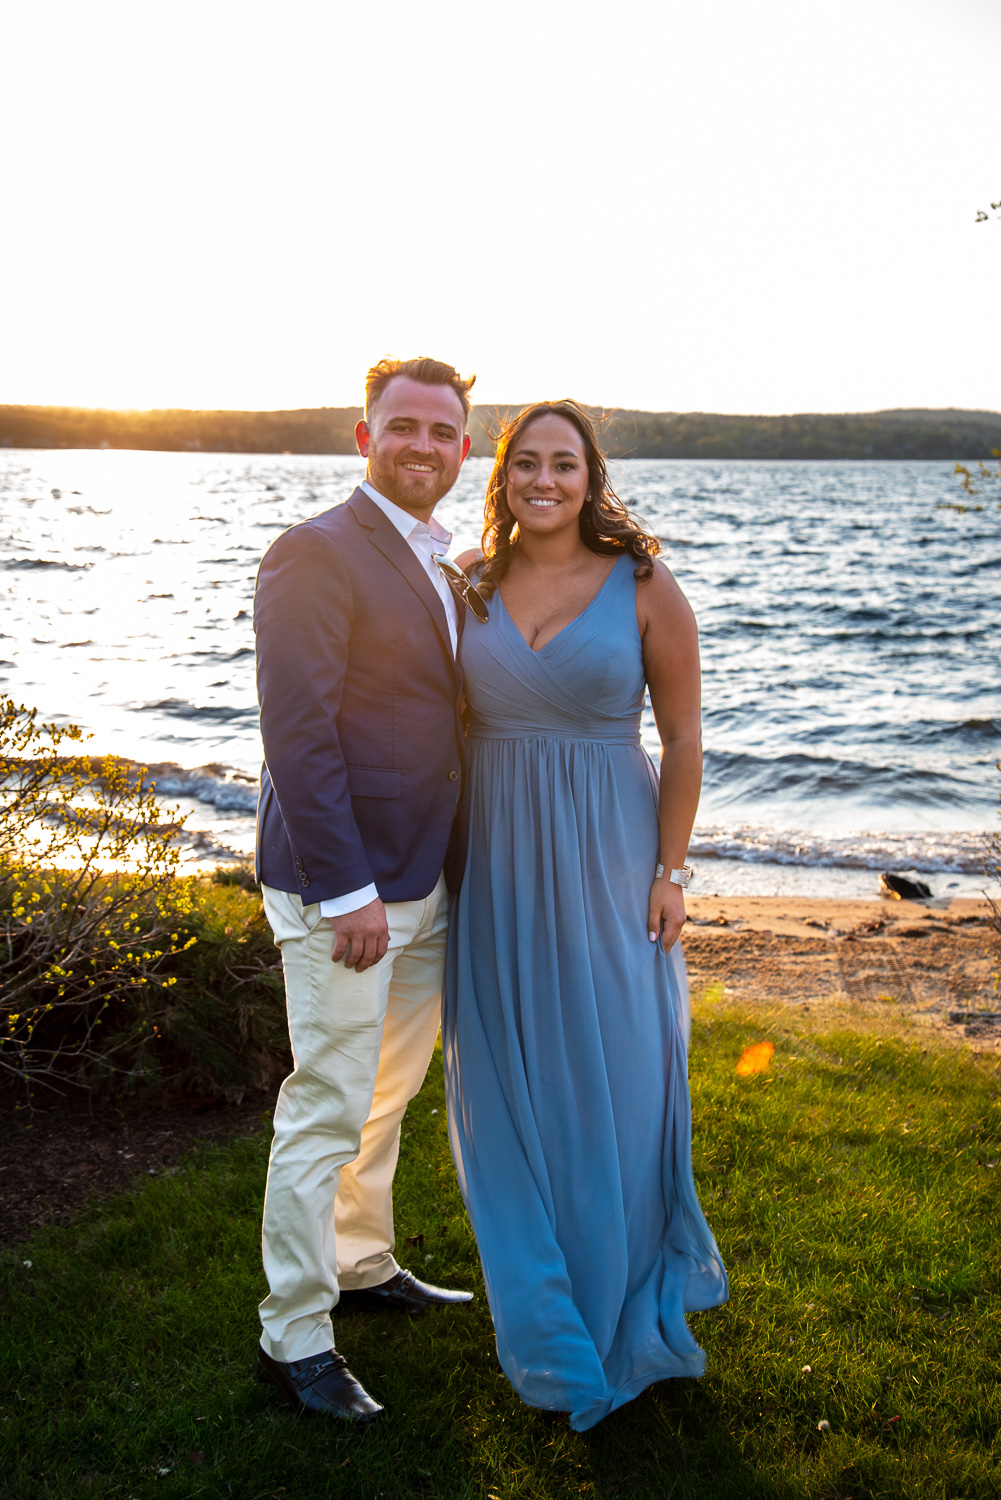 Sunset photos of guests at the lakeside wedding